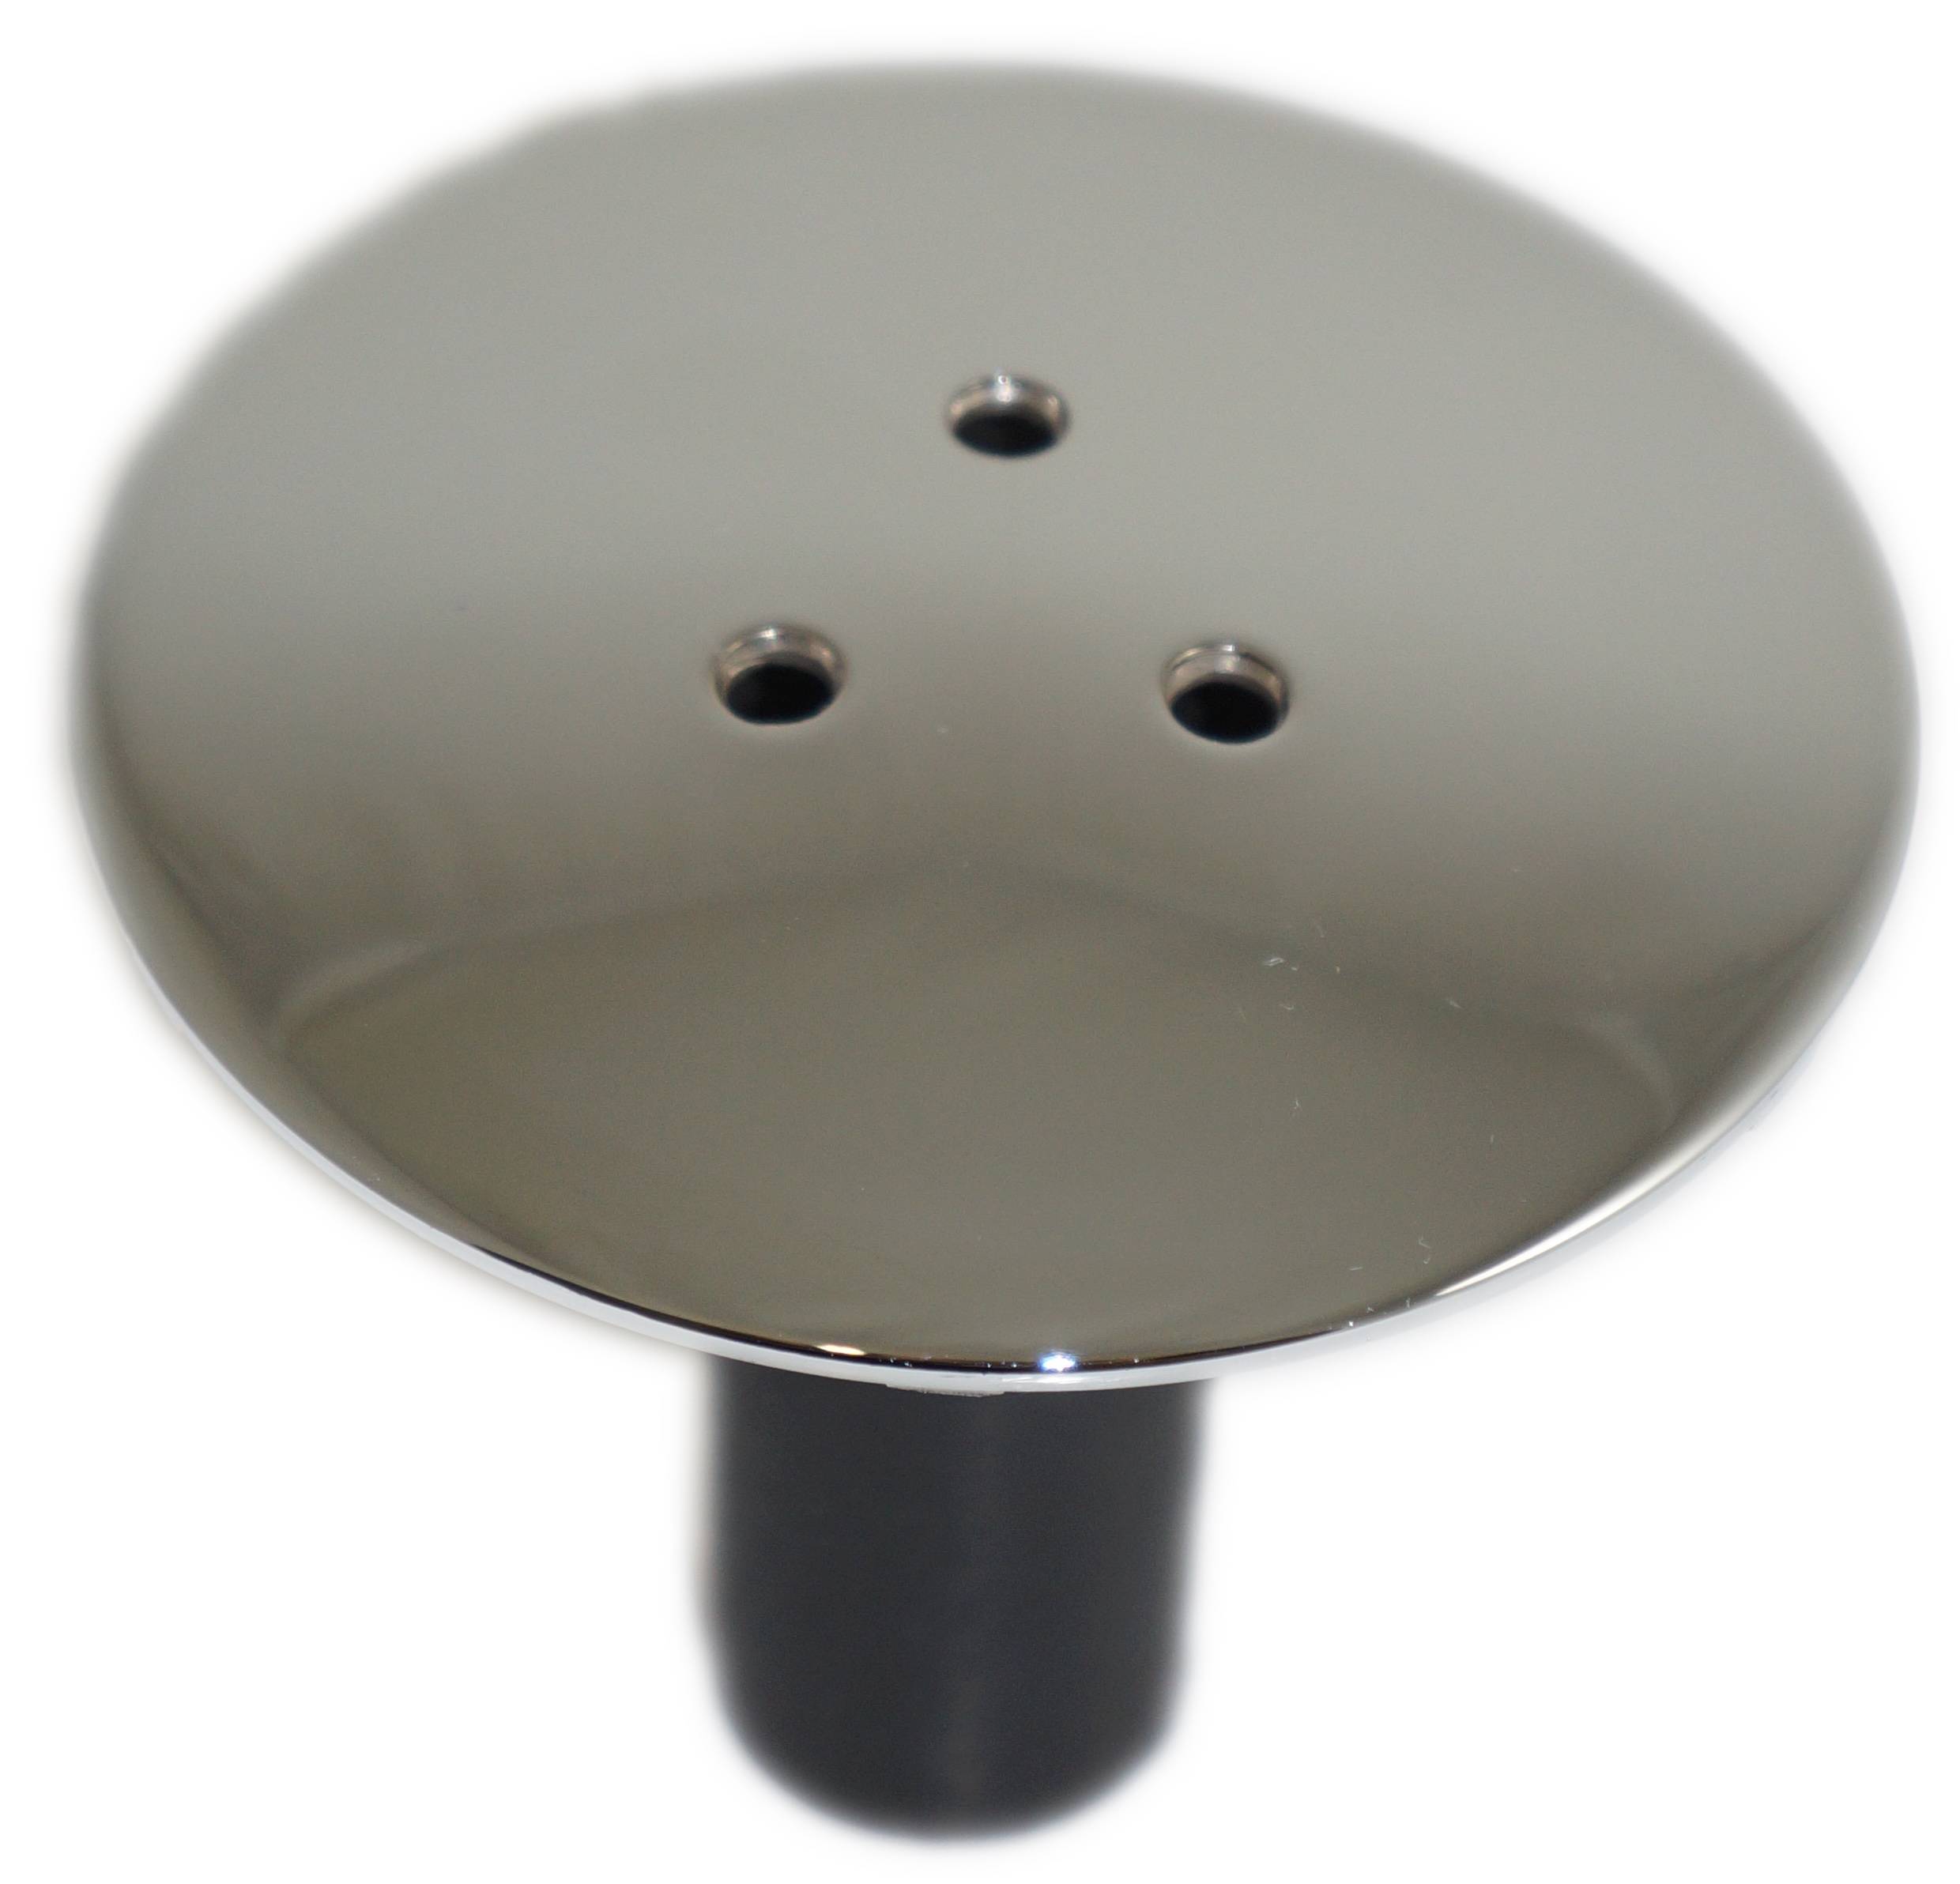 Metal cover with 90mm diameter water guard tube for 60mm drain